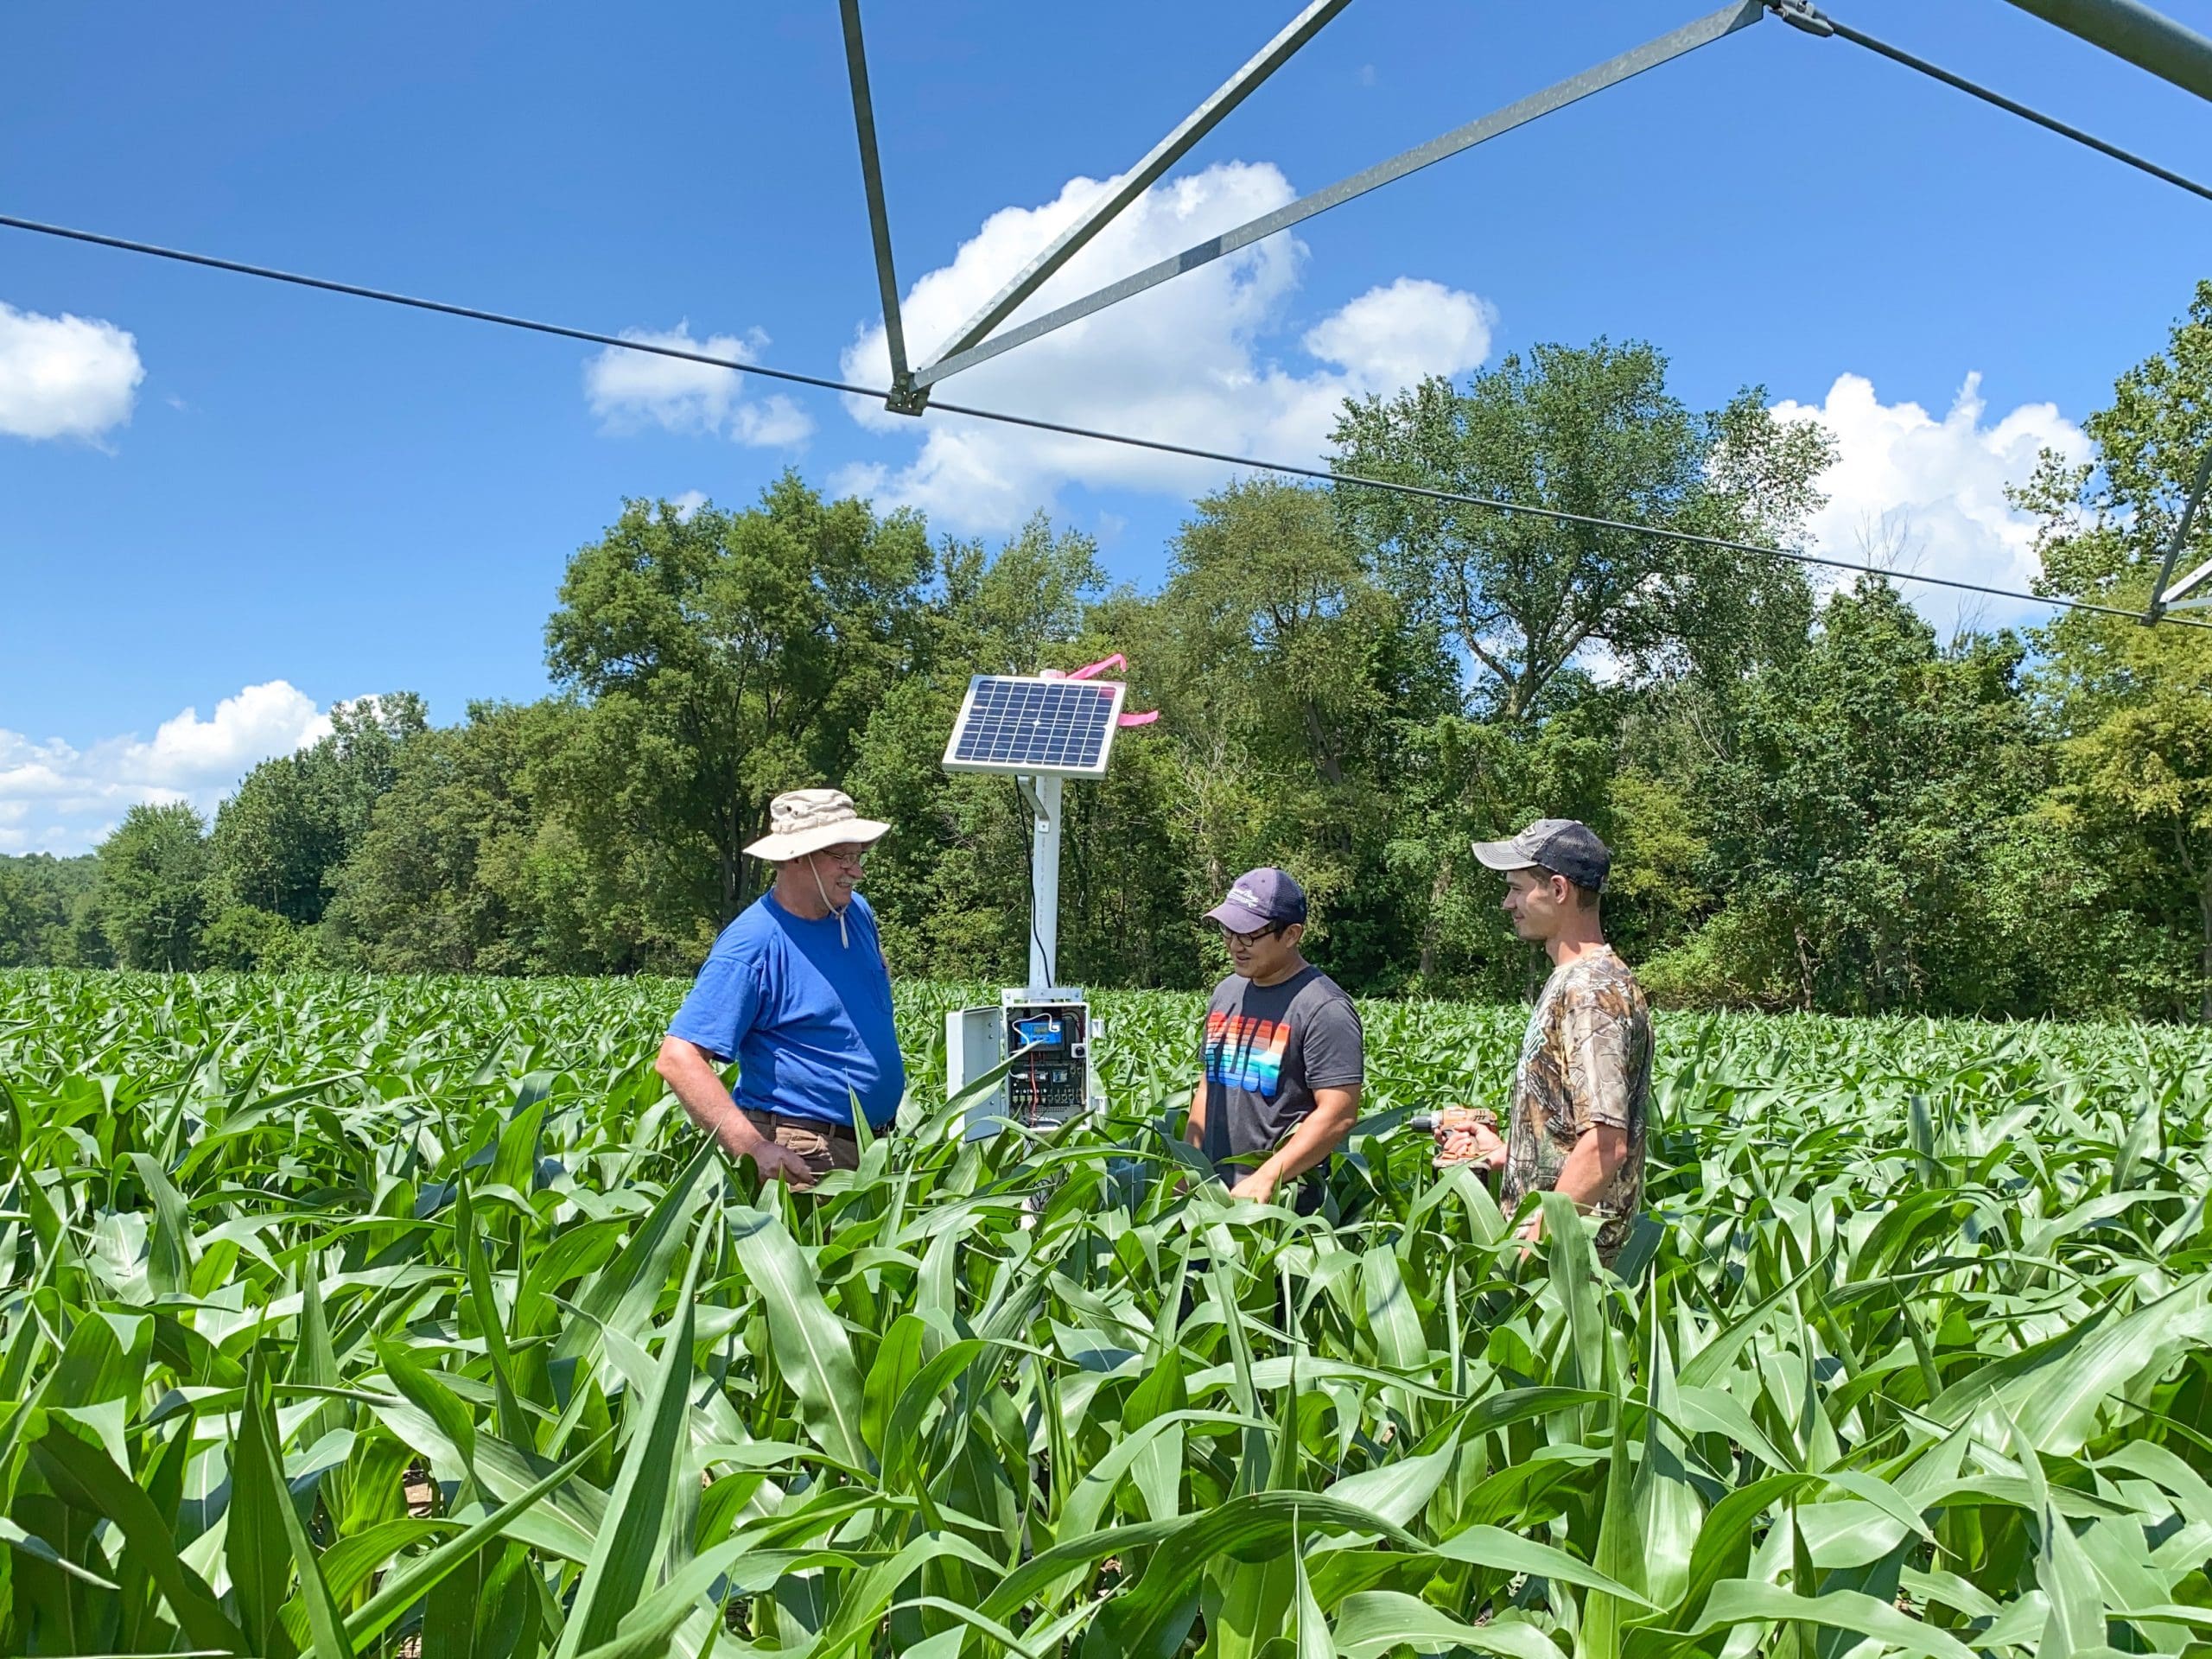 Younsuk Dong, a specialist in MSU’s Department of Biosystems & Agricultural Engineering, works with Lyndon Kelley, irrigation extension educator, and Brenden Kelley, a student research assistant, to install LOCOMOS stations in a corn field in Tekonsha, Michigan.